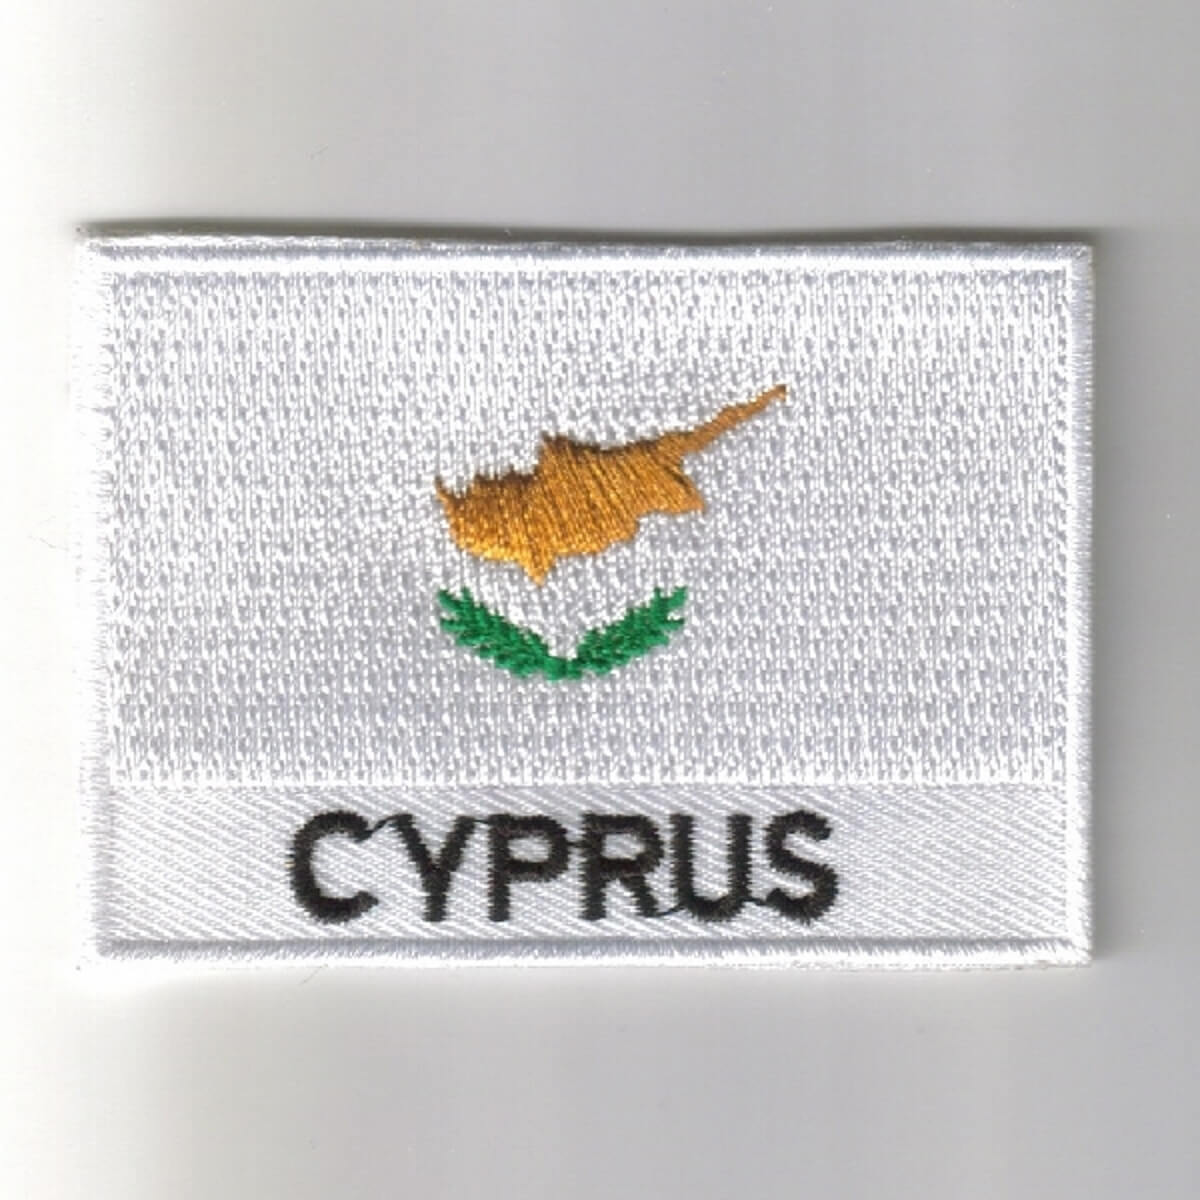 Cyprus embroidered patches - country flag Cyprus patches / iron on badges